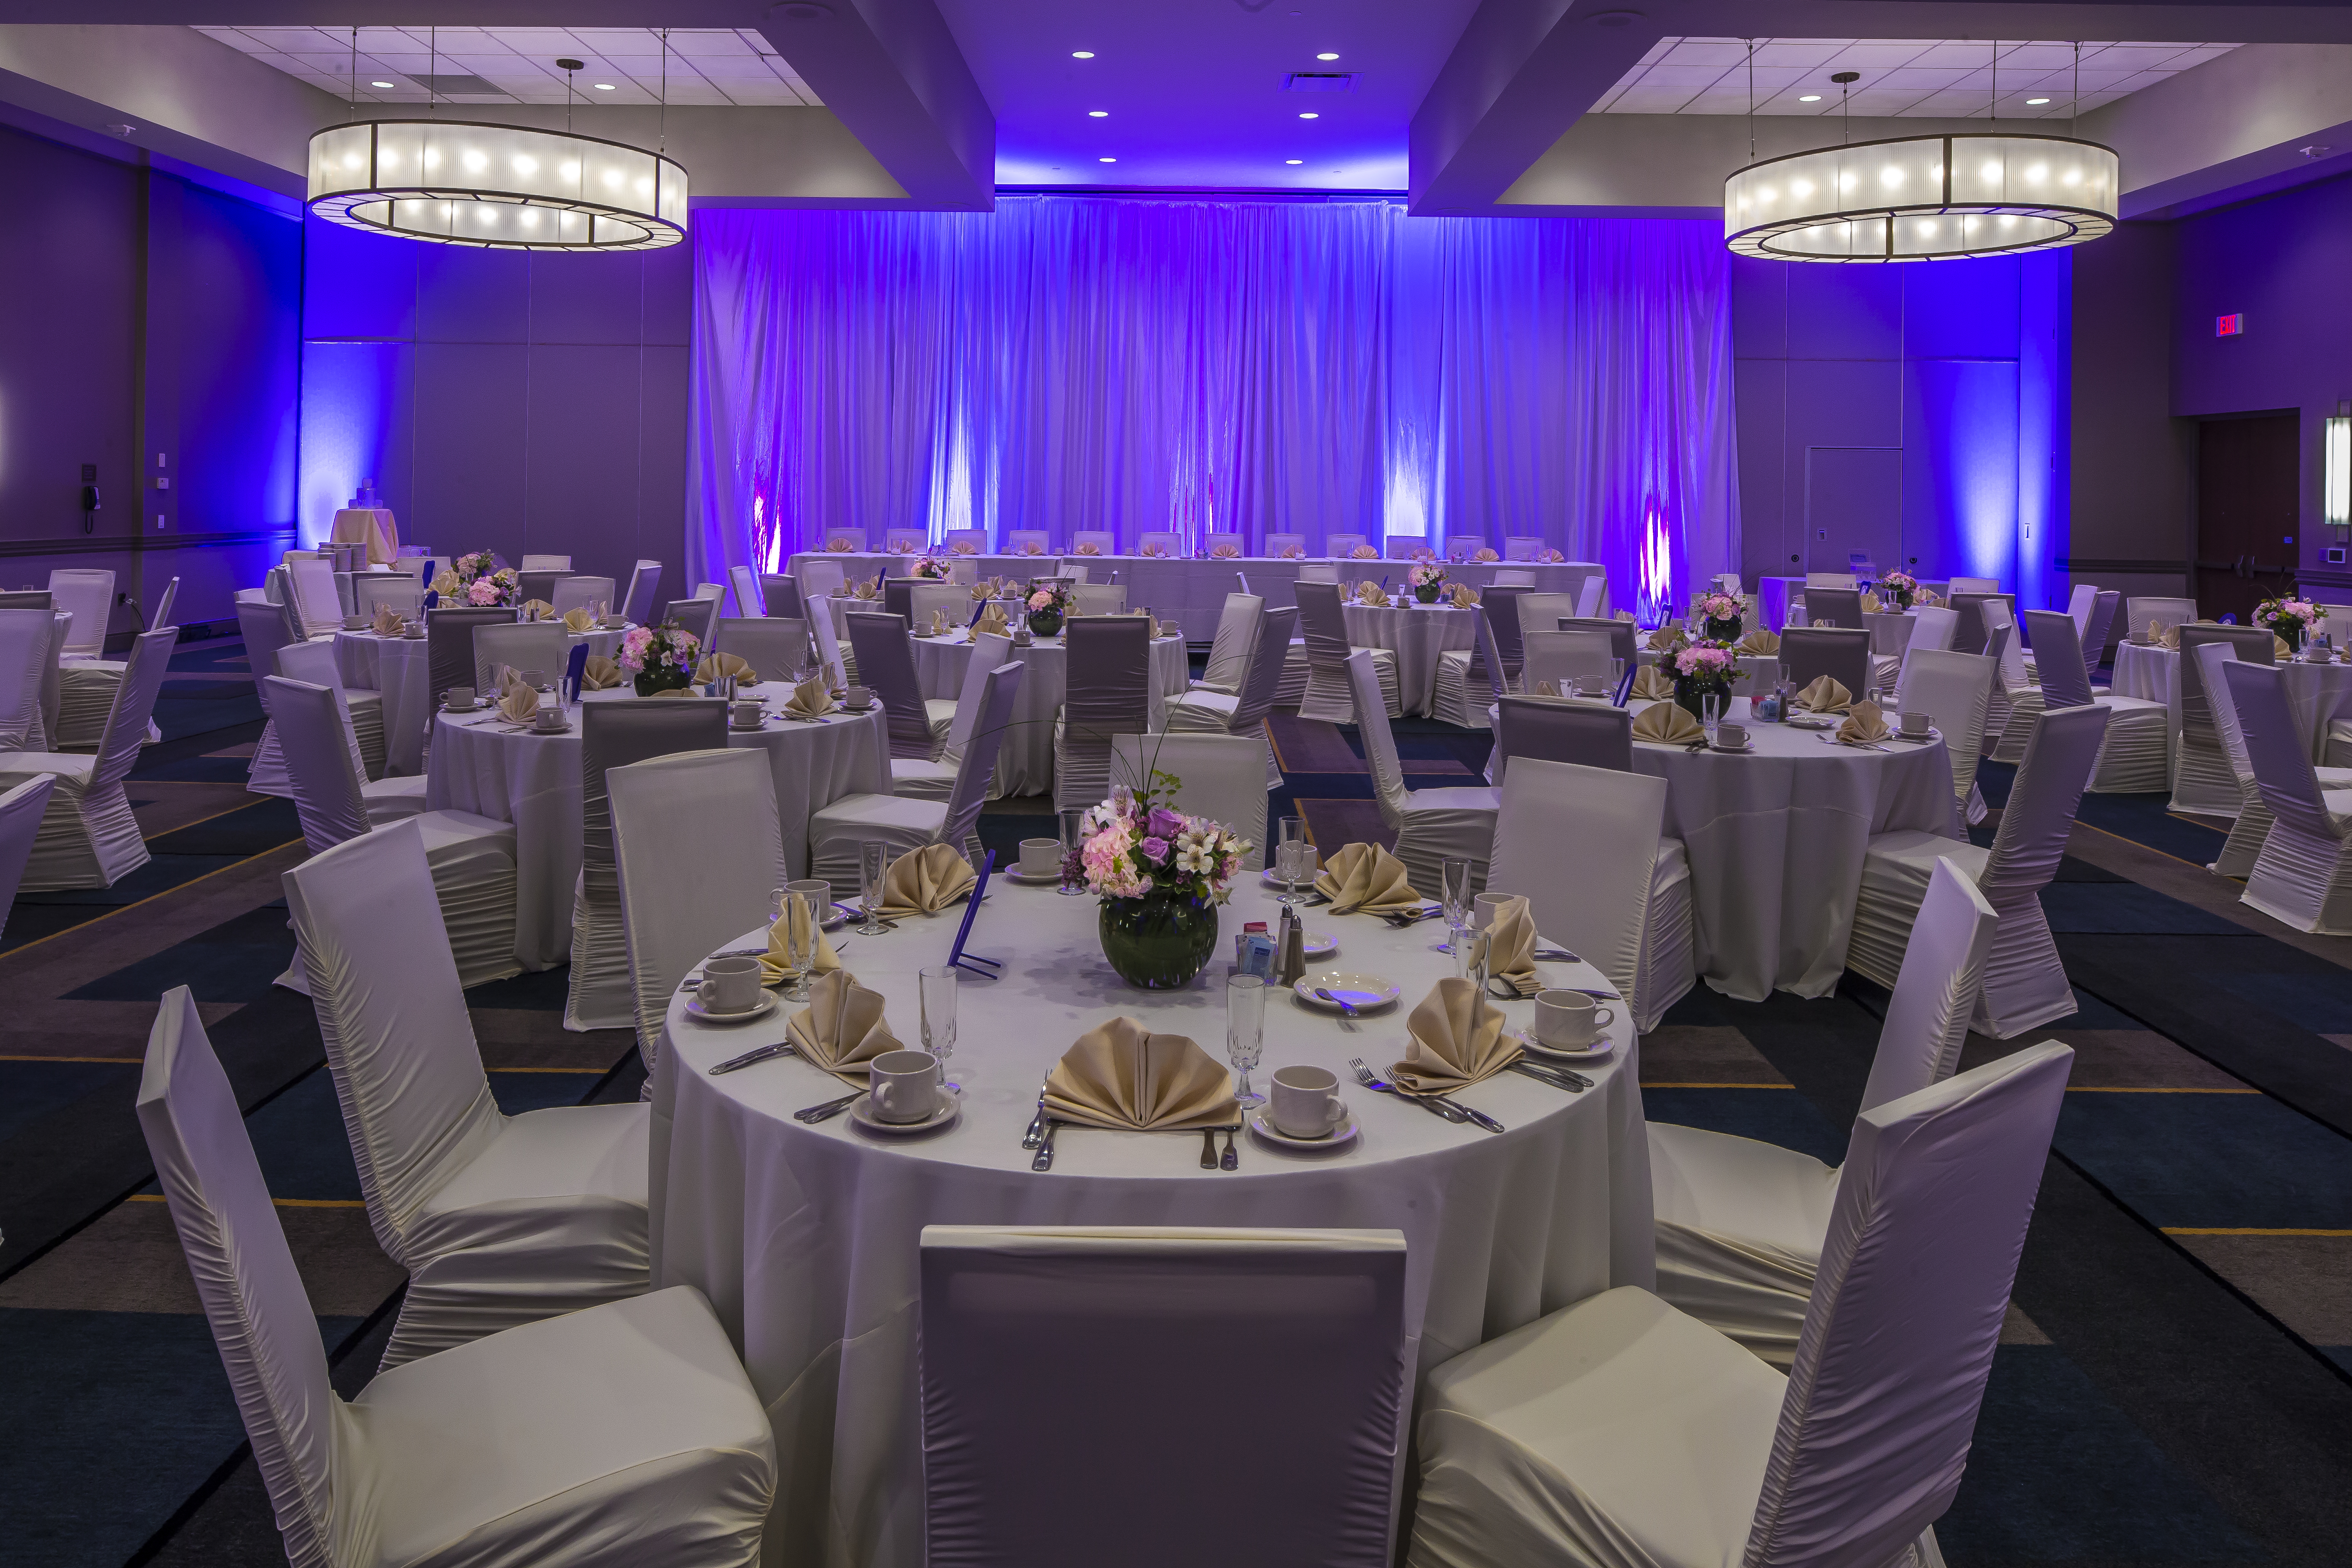 White Chairs, Place Settings, Flowers, Fan-Folded Napkins, Drinking Glasses, and White Linens on Round Tables, and Dramatic Drapes With Purple Lighting Behind Head Table in Banquet Hall Set Up For Wedding Reception